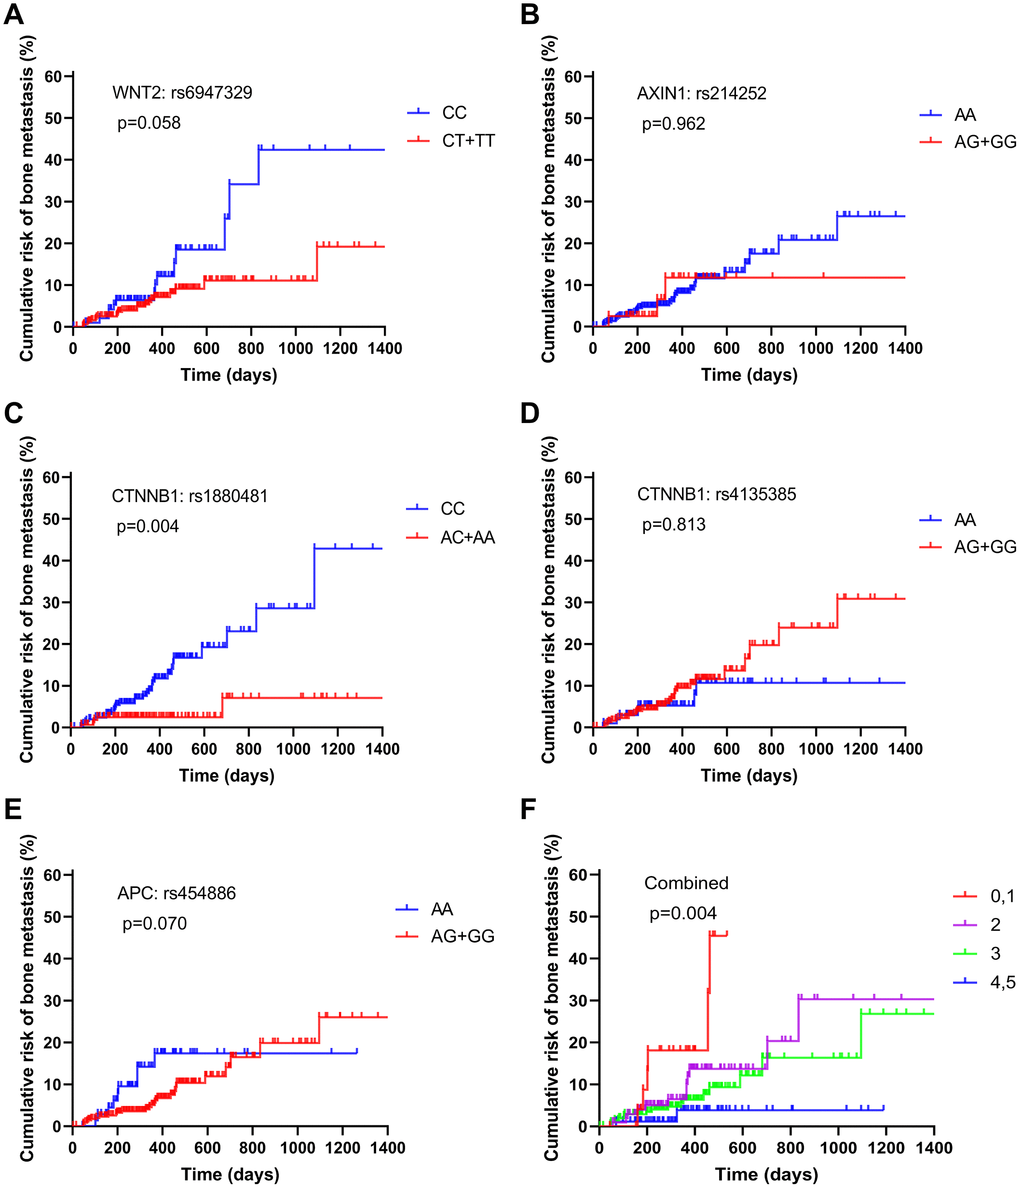 Estimation of the cumulative risk of patients with bone metastasis from NSCLC based on the following protective genotypes: (A) WNT2: rs6947329, (B) AXIN1: rs214252, (C) CTNNB1: rs1880481, (D) CTNNB1: rs4135385, (E) APC: rs454886, and (F) combined.